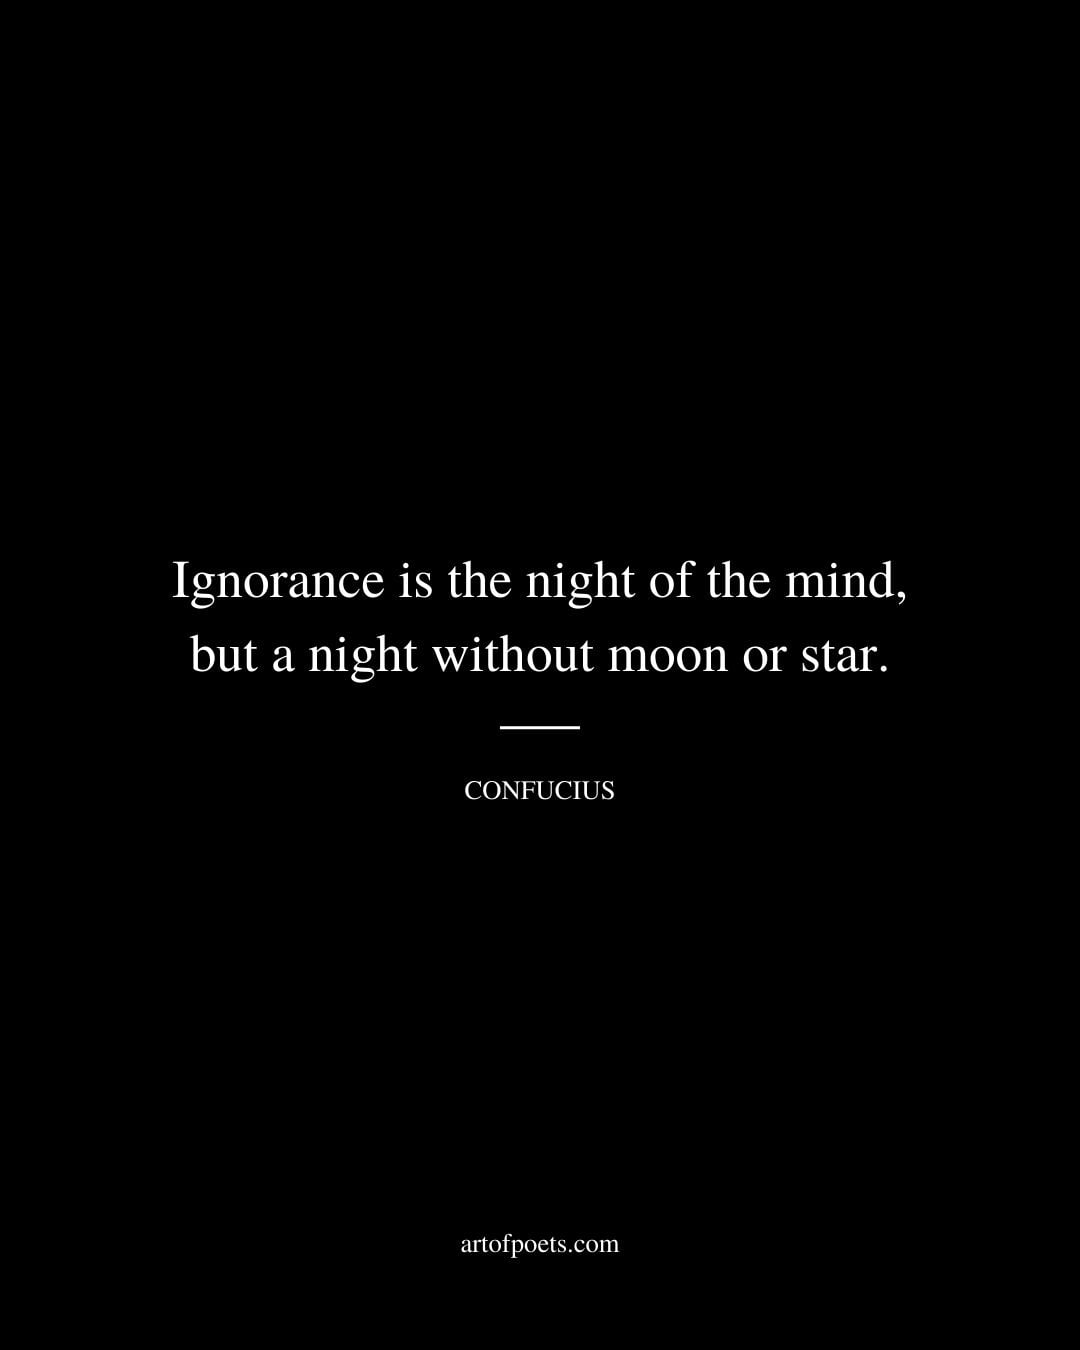 Ignorance is the night of the mind but a night without moon or star